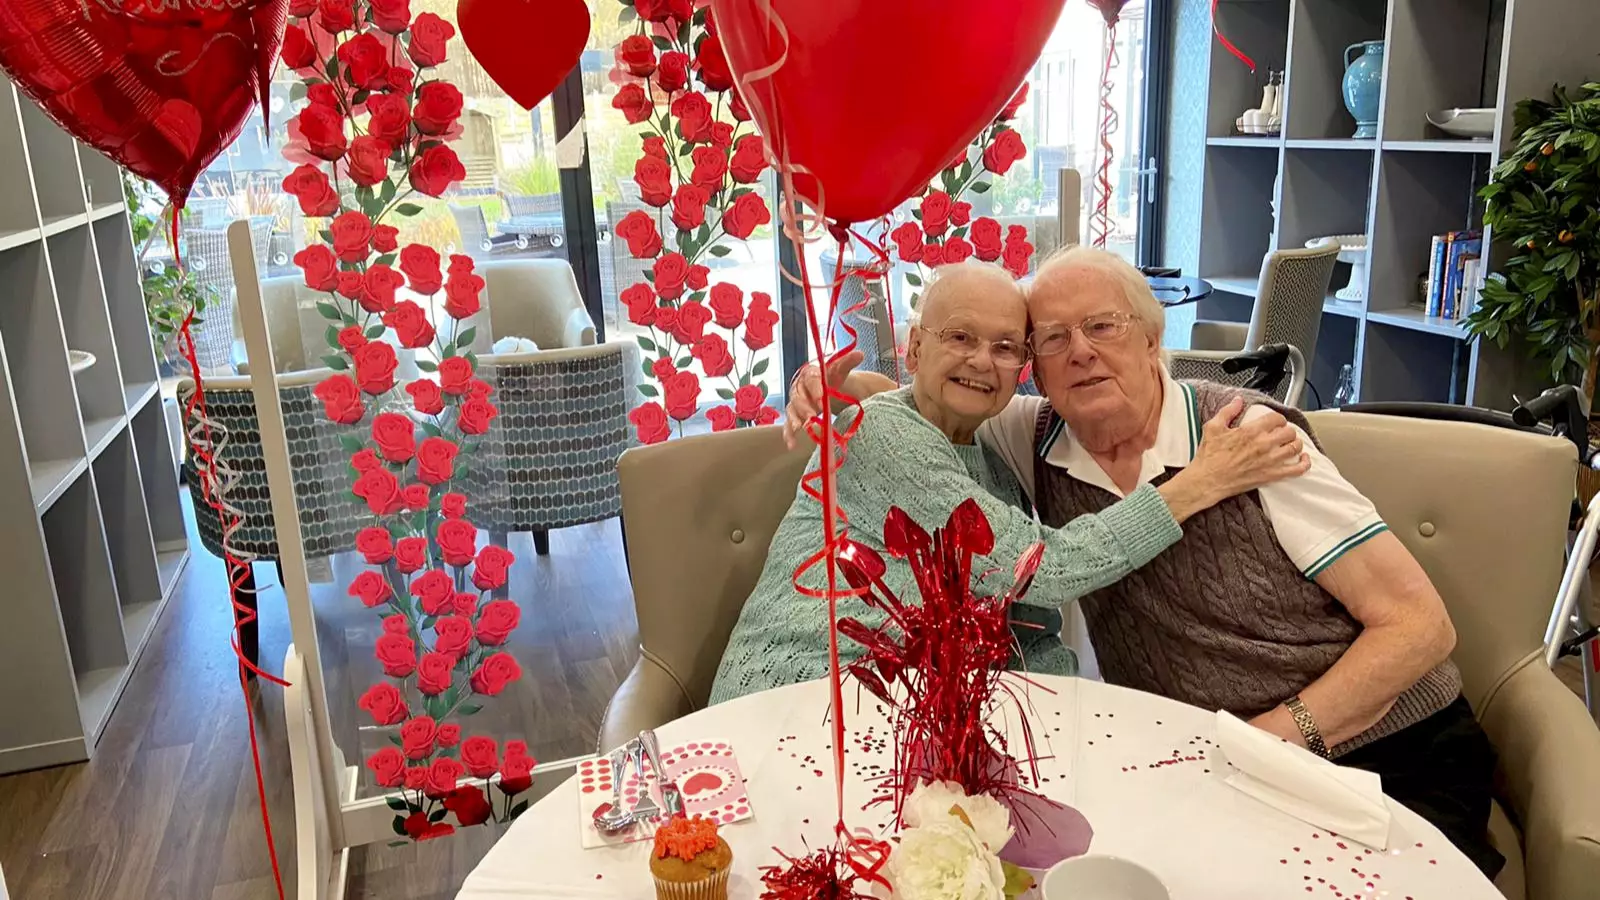 Watch The Moment A Devoted Wife Surprises Dementia-Sufferer Husband In Care Home After A Month Apart